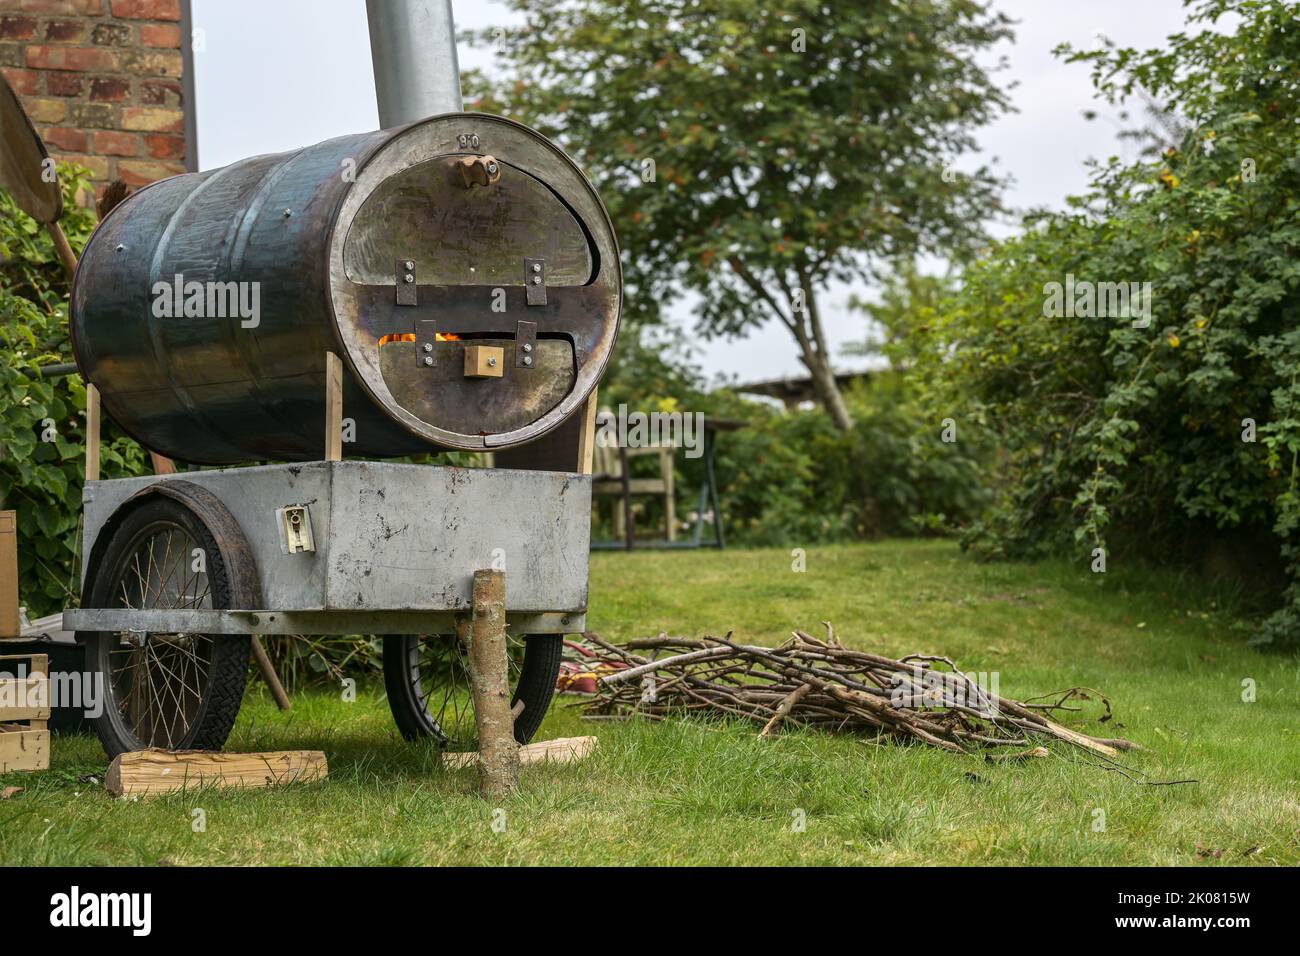 Homemade mobile pizza oven from an old metal barrel on a recycled chassis in a garden, fire in the combustion chamber and firewood on the lawn, copy s Stock Photo